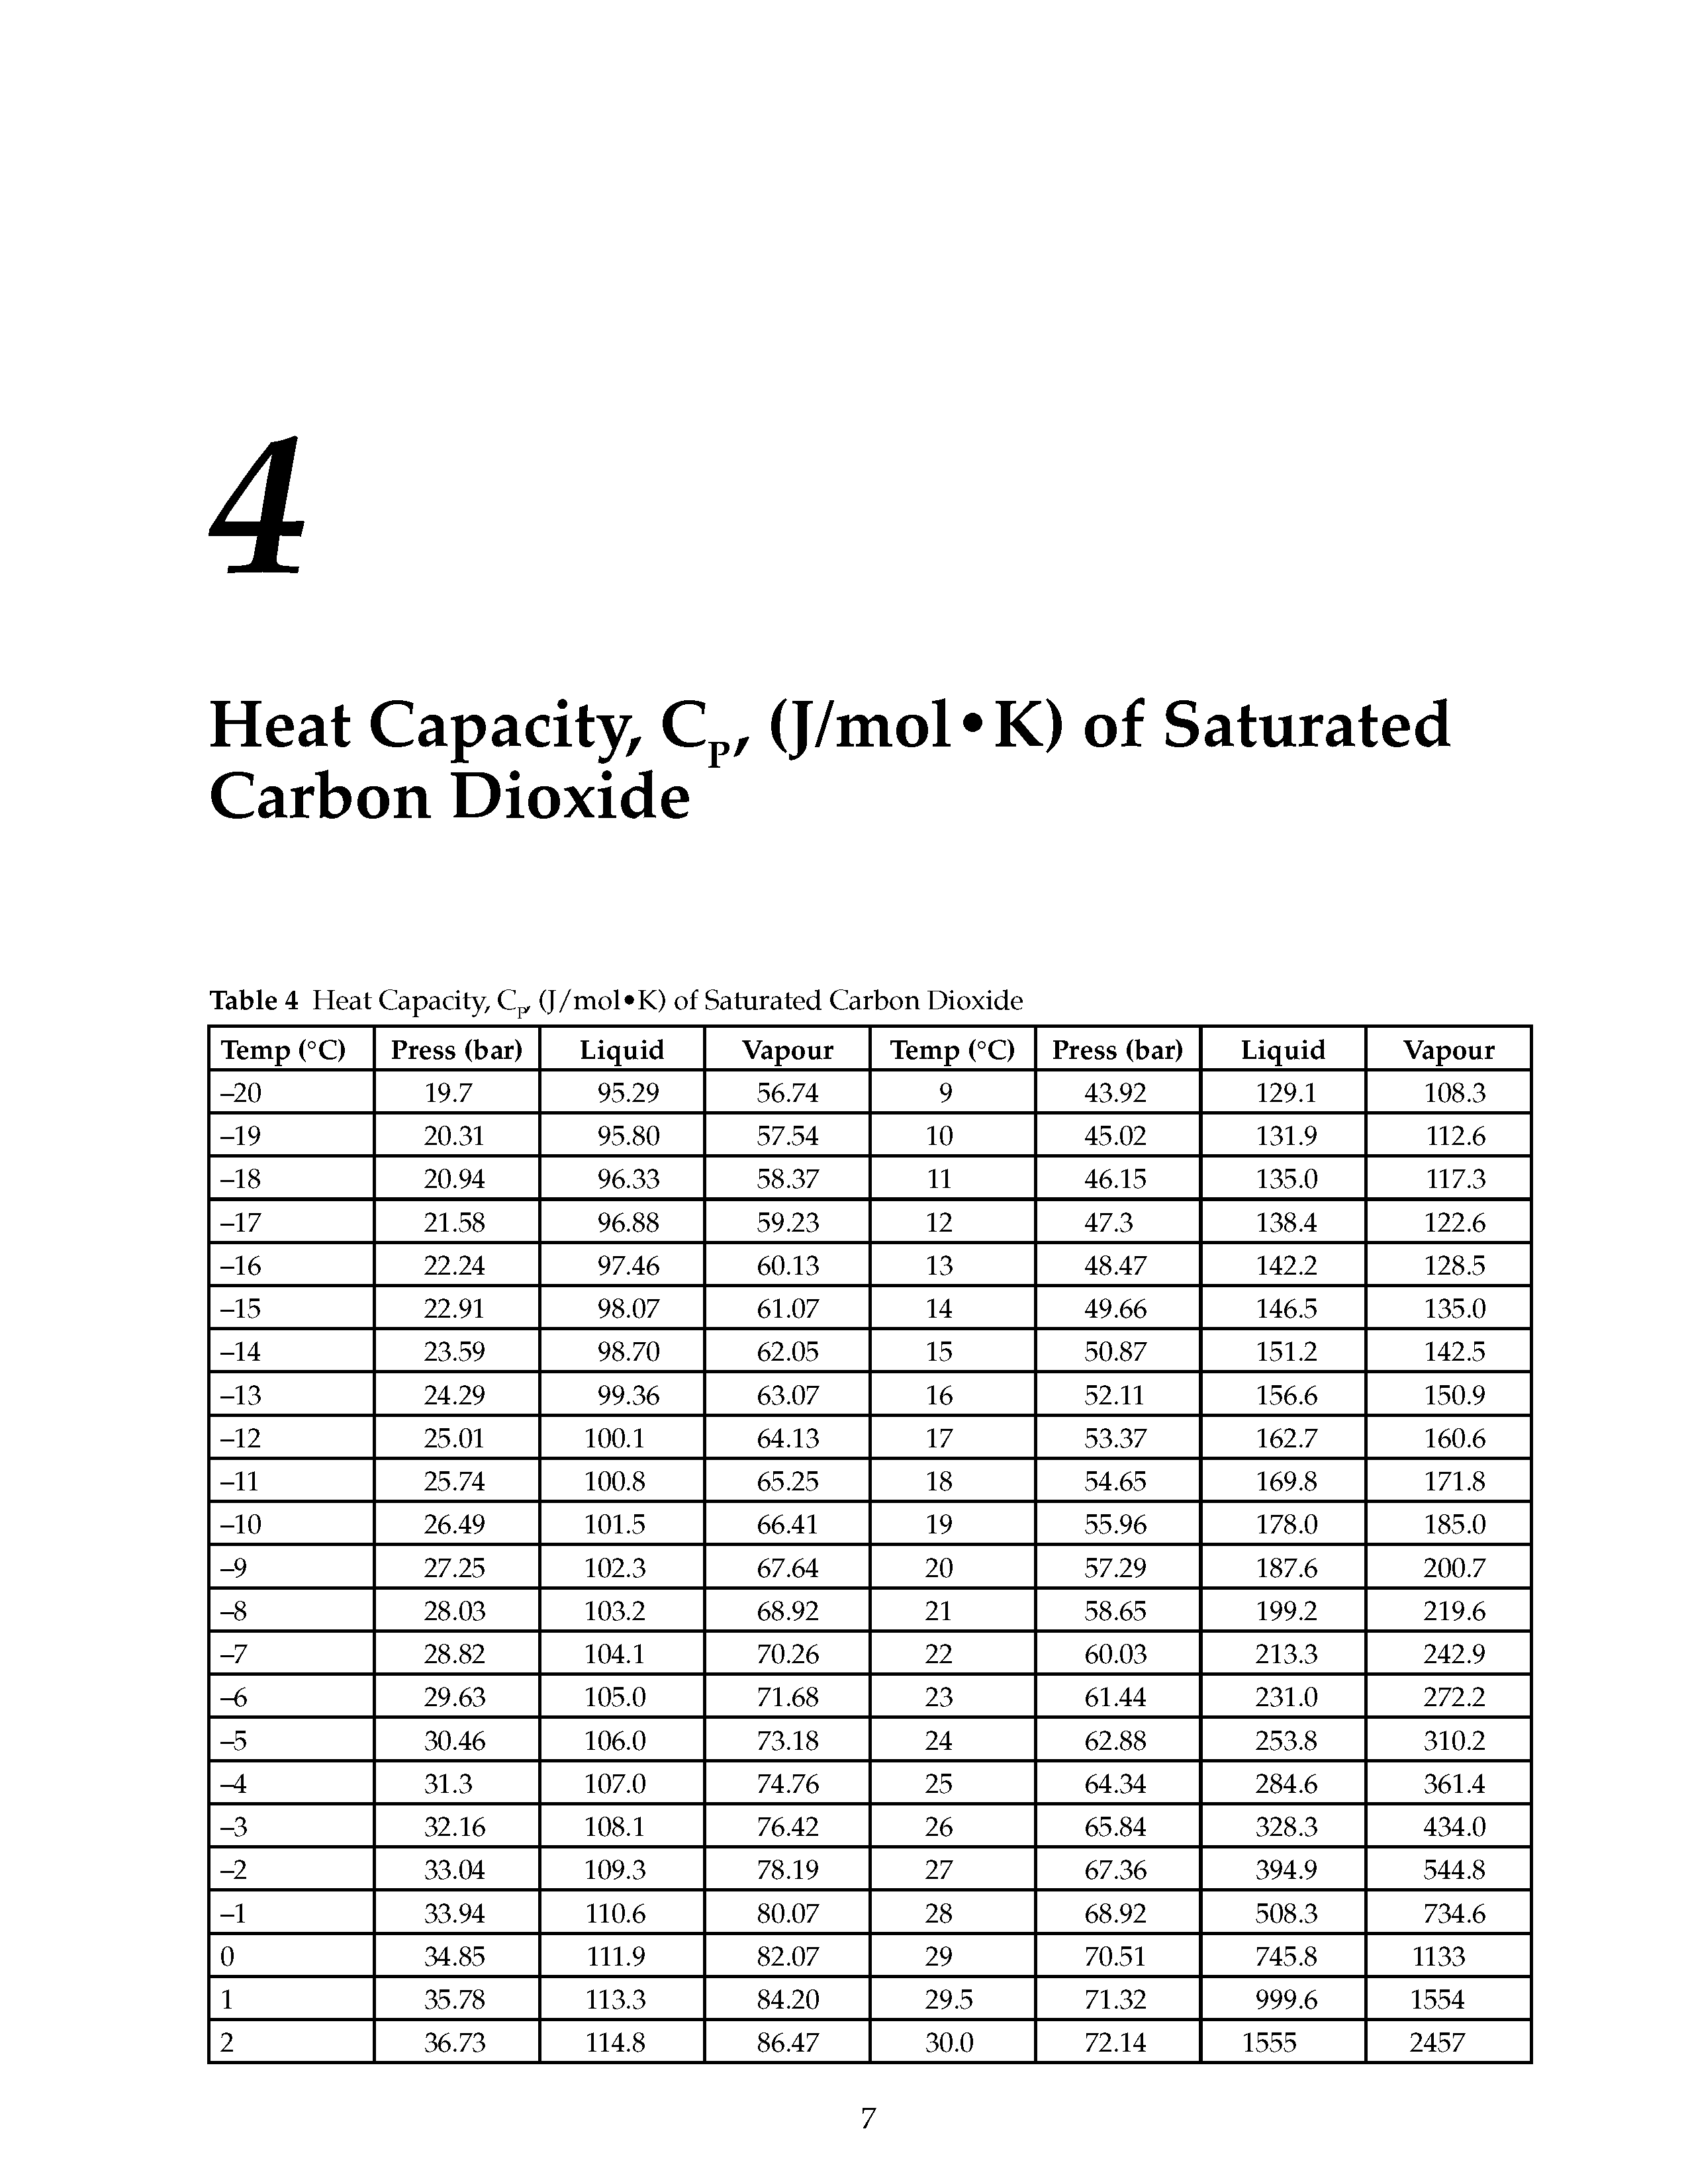 Table 4 Heat Capacity, Cp (J/mol K) of Saturated Carbon Dioxide...